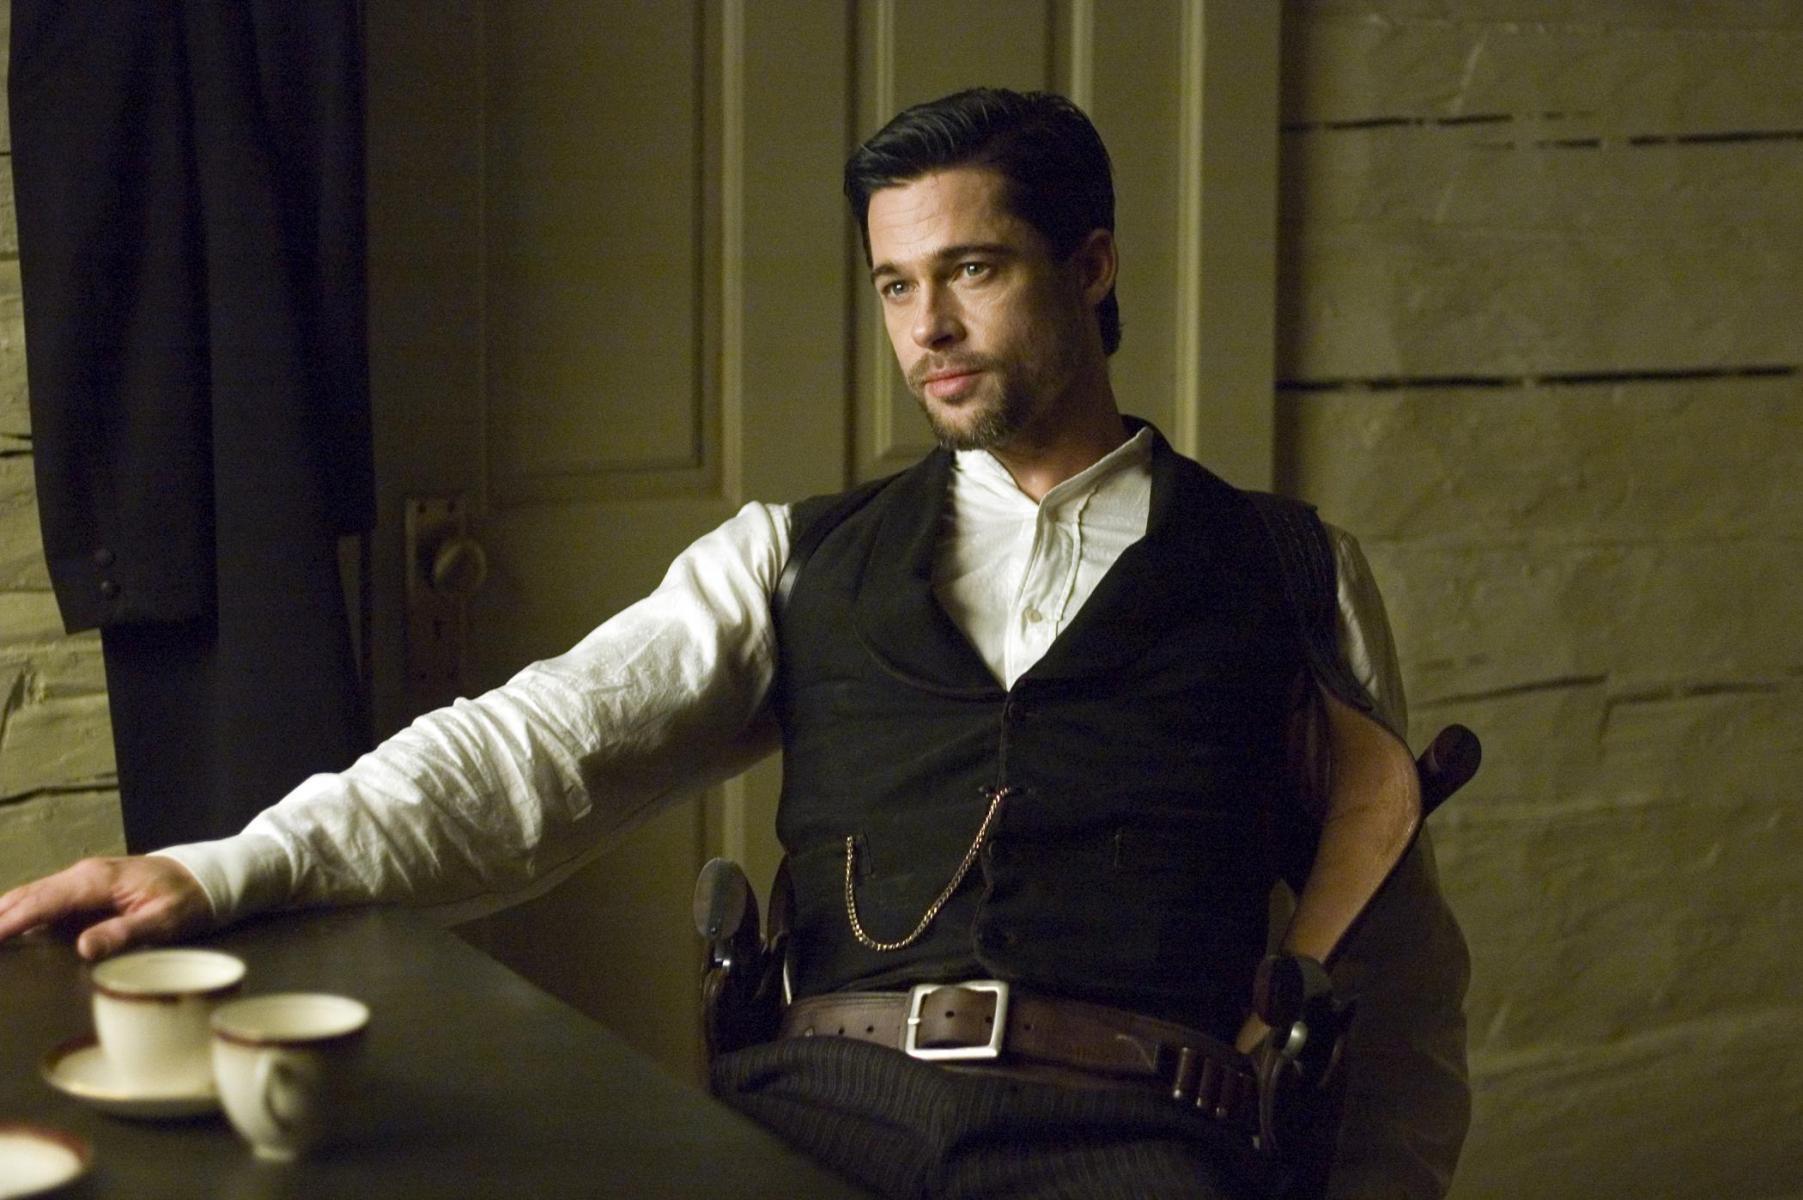 ‘The Assassination of Jesse James by the Coward Robert Ford’ is a Hauntingly Beautiful Film